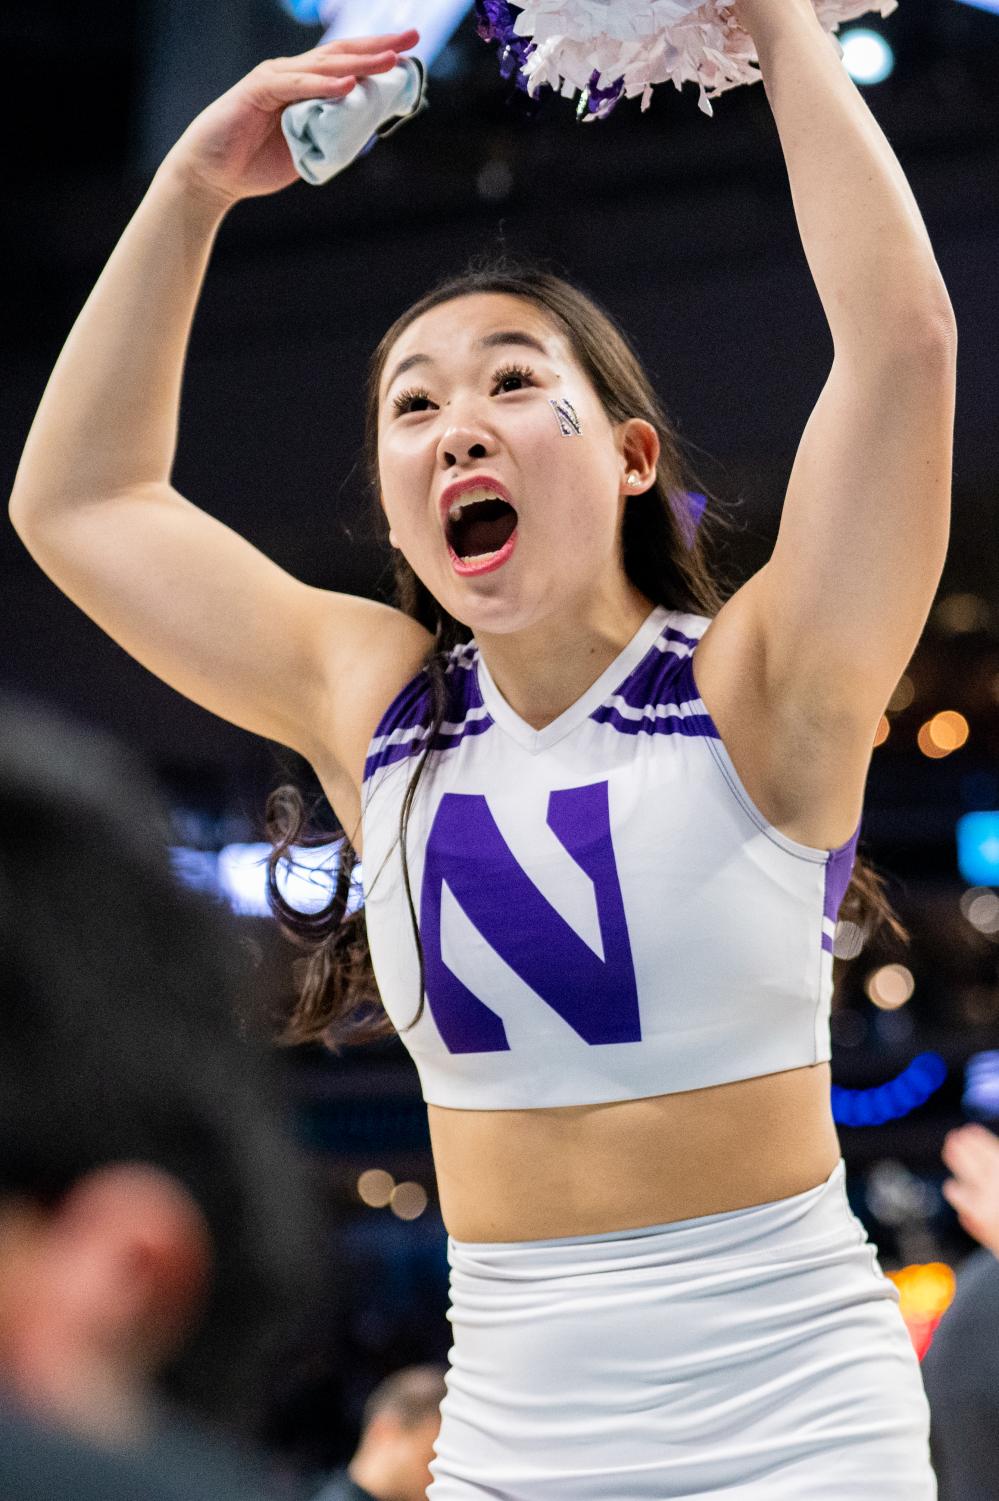 A cheerleader in white-and-purple raises their arms above their head and speaks to the crowd.